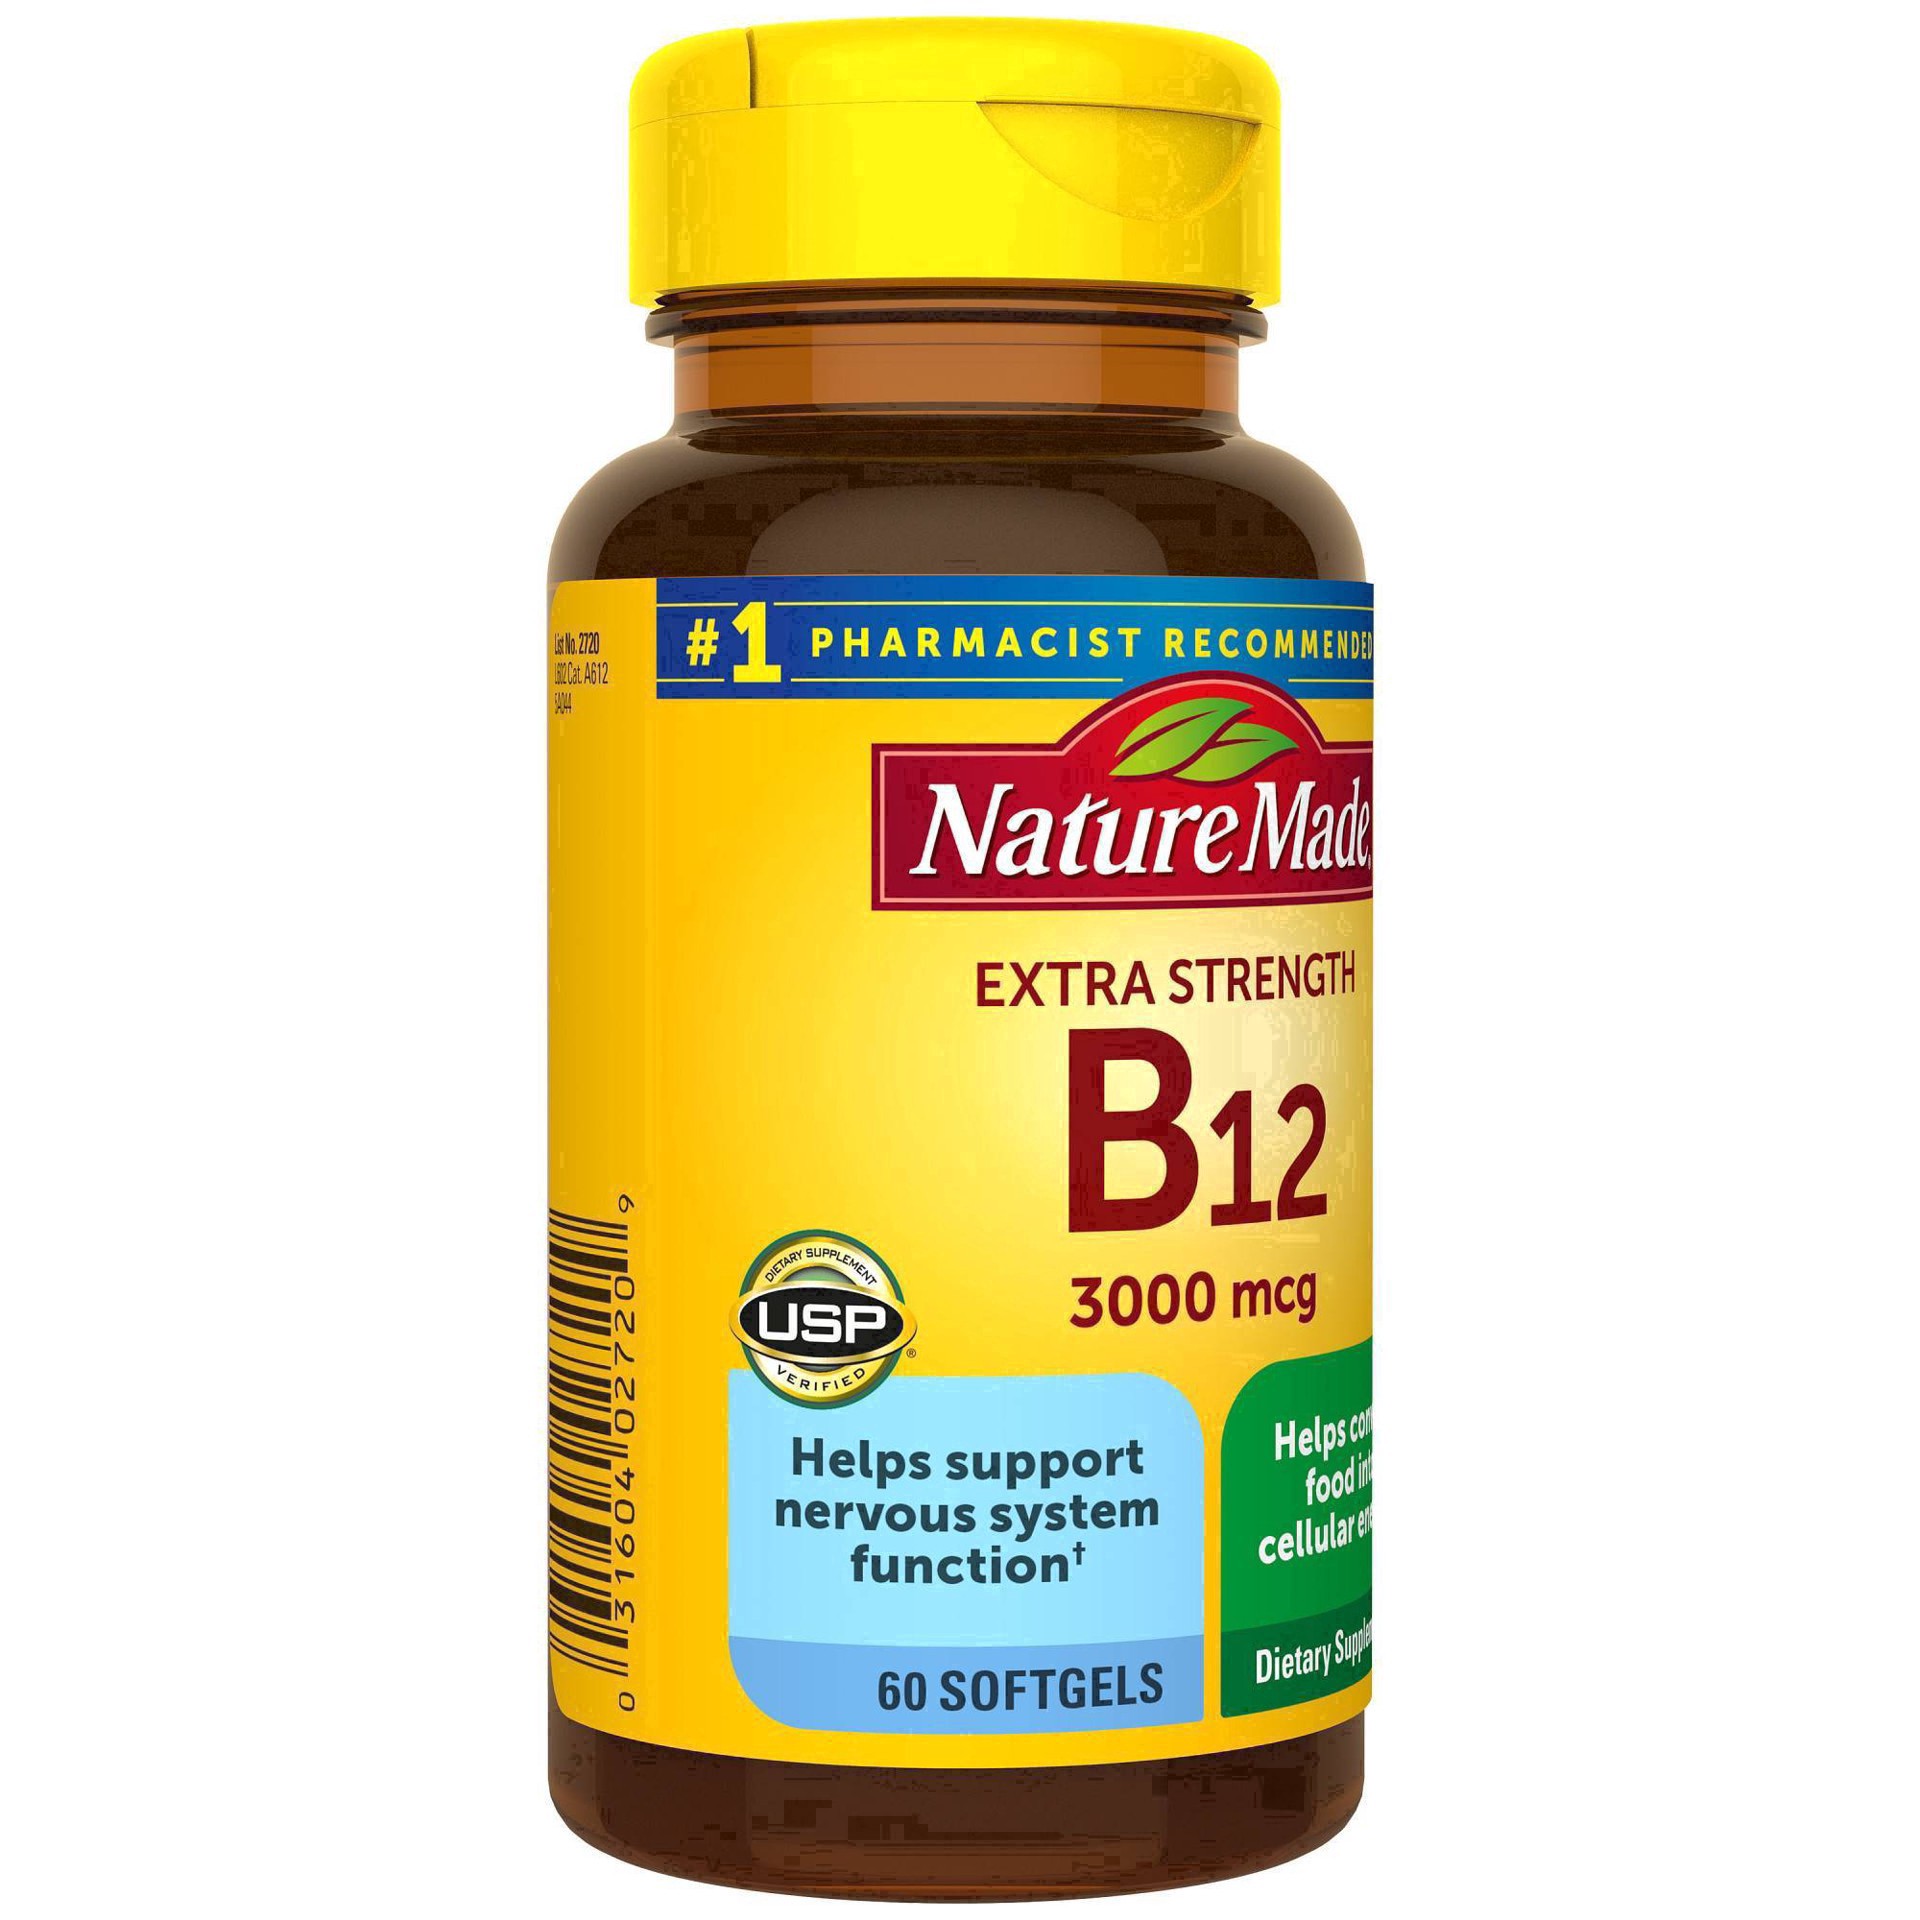 slide 28 of 74, Nature Made Extra Strength Vitamin B12 3000 mcg Energy Metabolism Support Softgels - 60ct, 60 ct